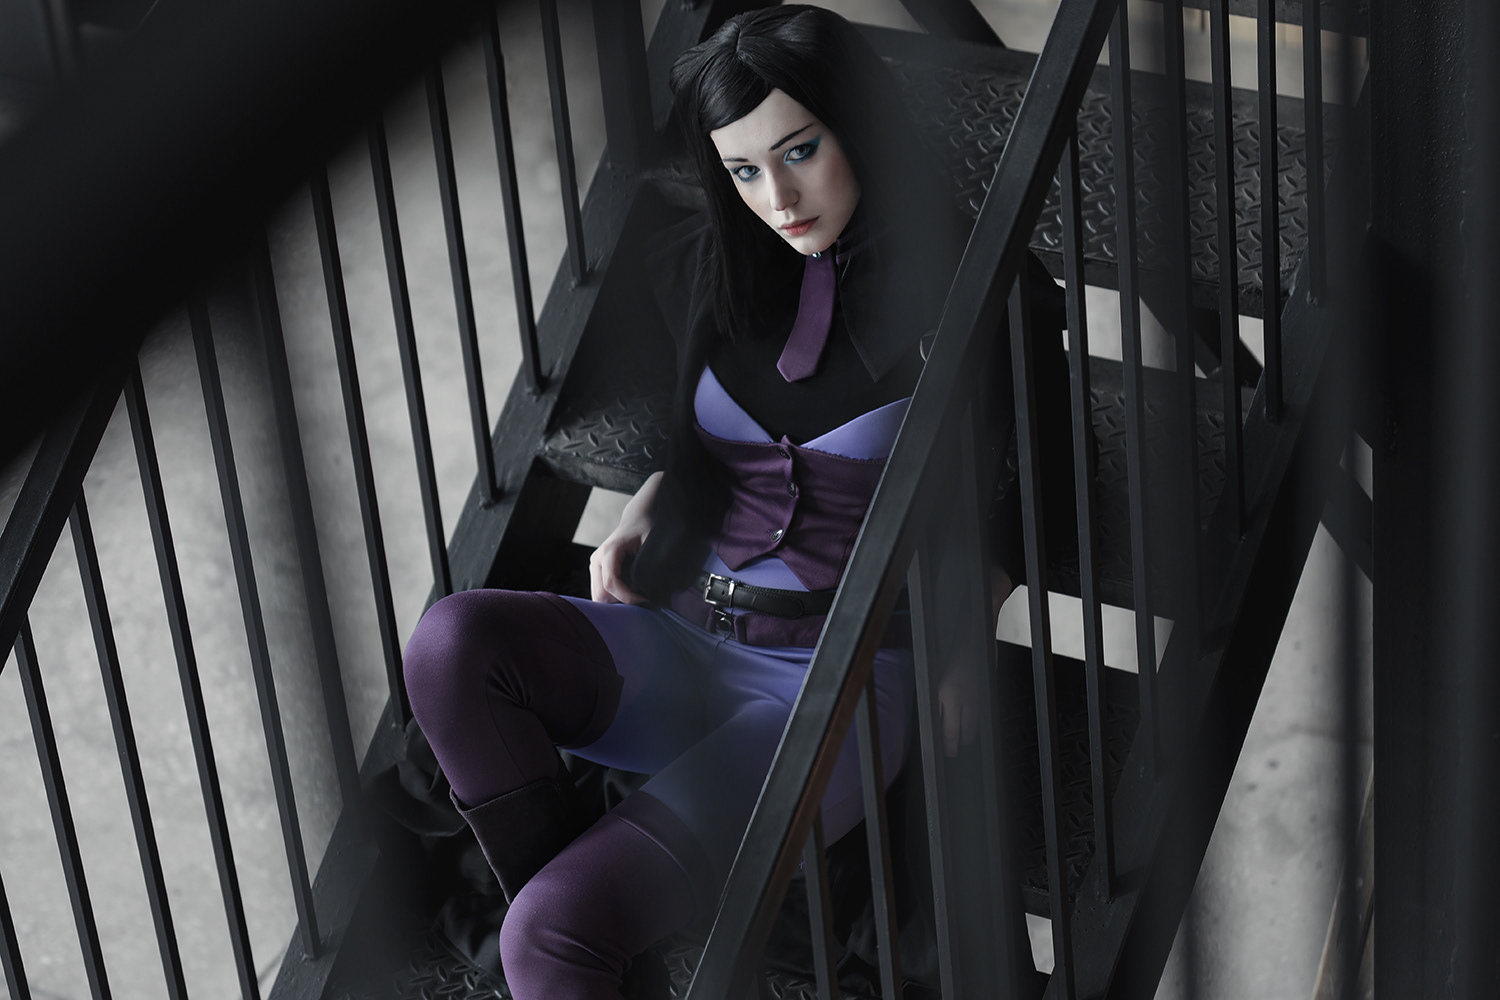 L.E.N. on X: Little cosplay of Re-L Mayer (from the anime Ergo Proxy) What  do you think? 😀 Btw, if you haven't watched the series I really recommend  it! Gorgeous, dark, dystopian/sci-fi